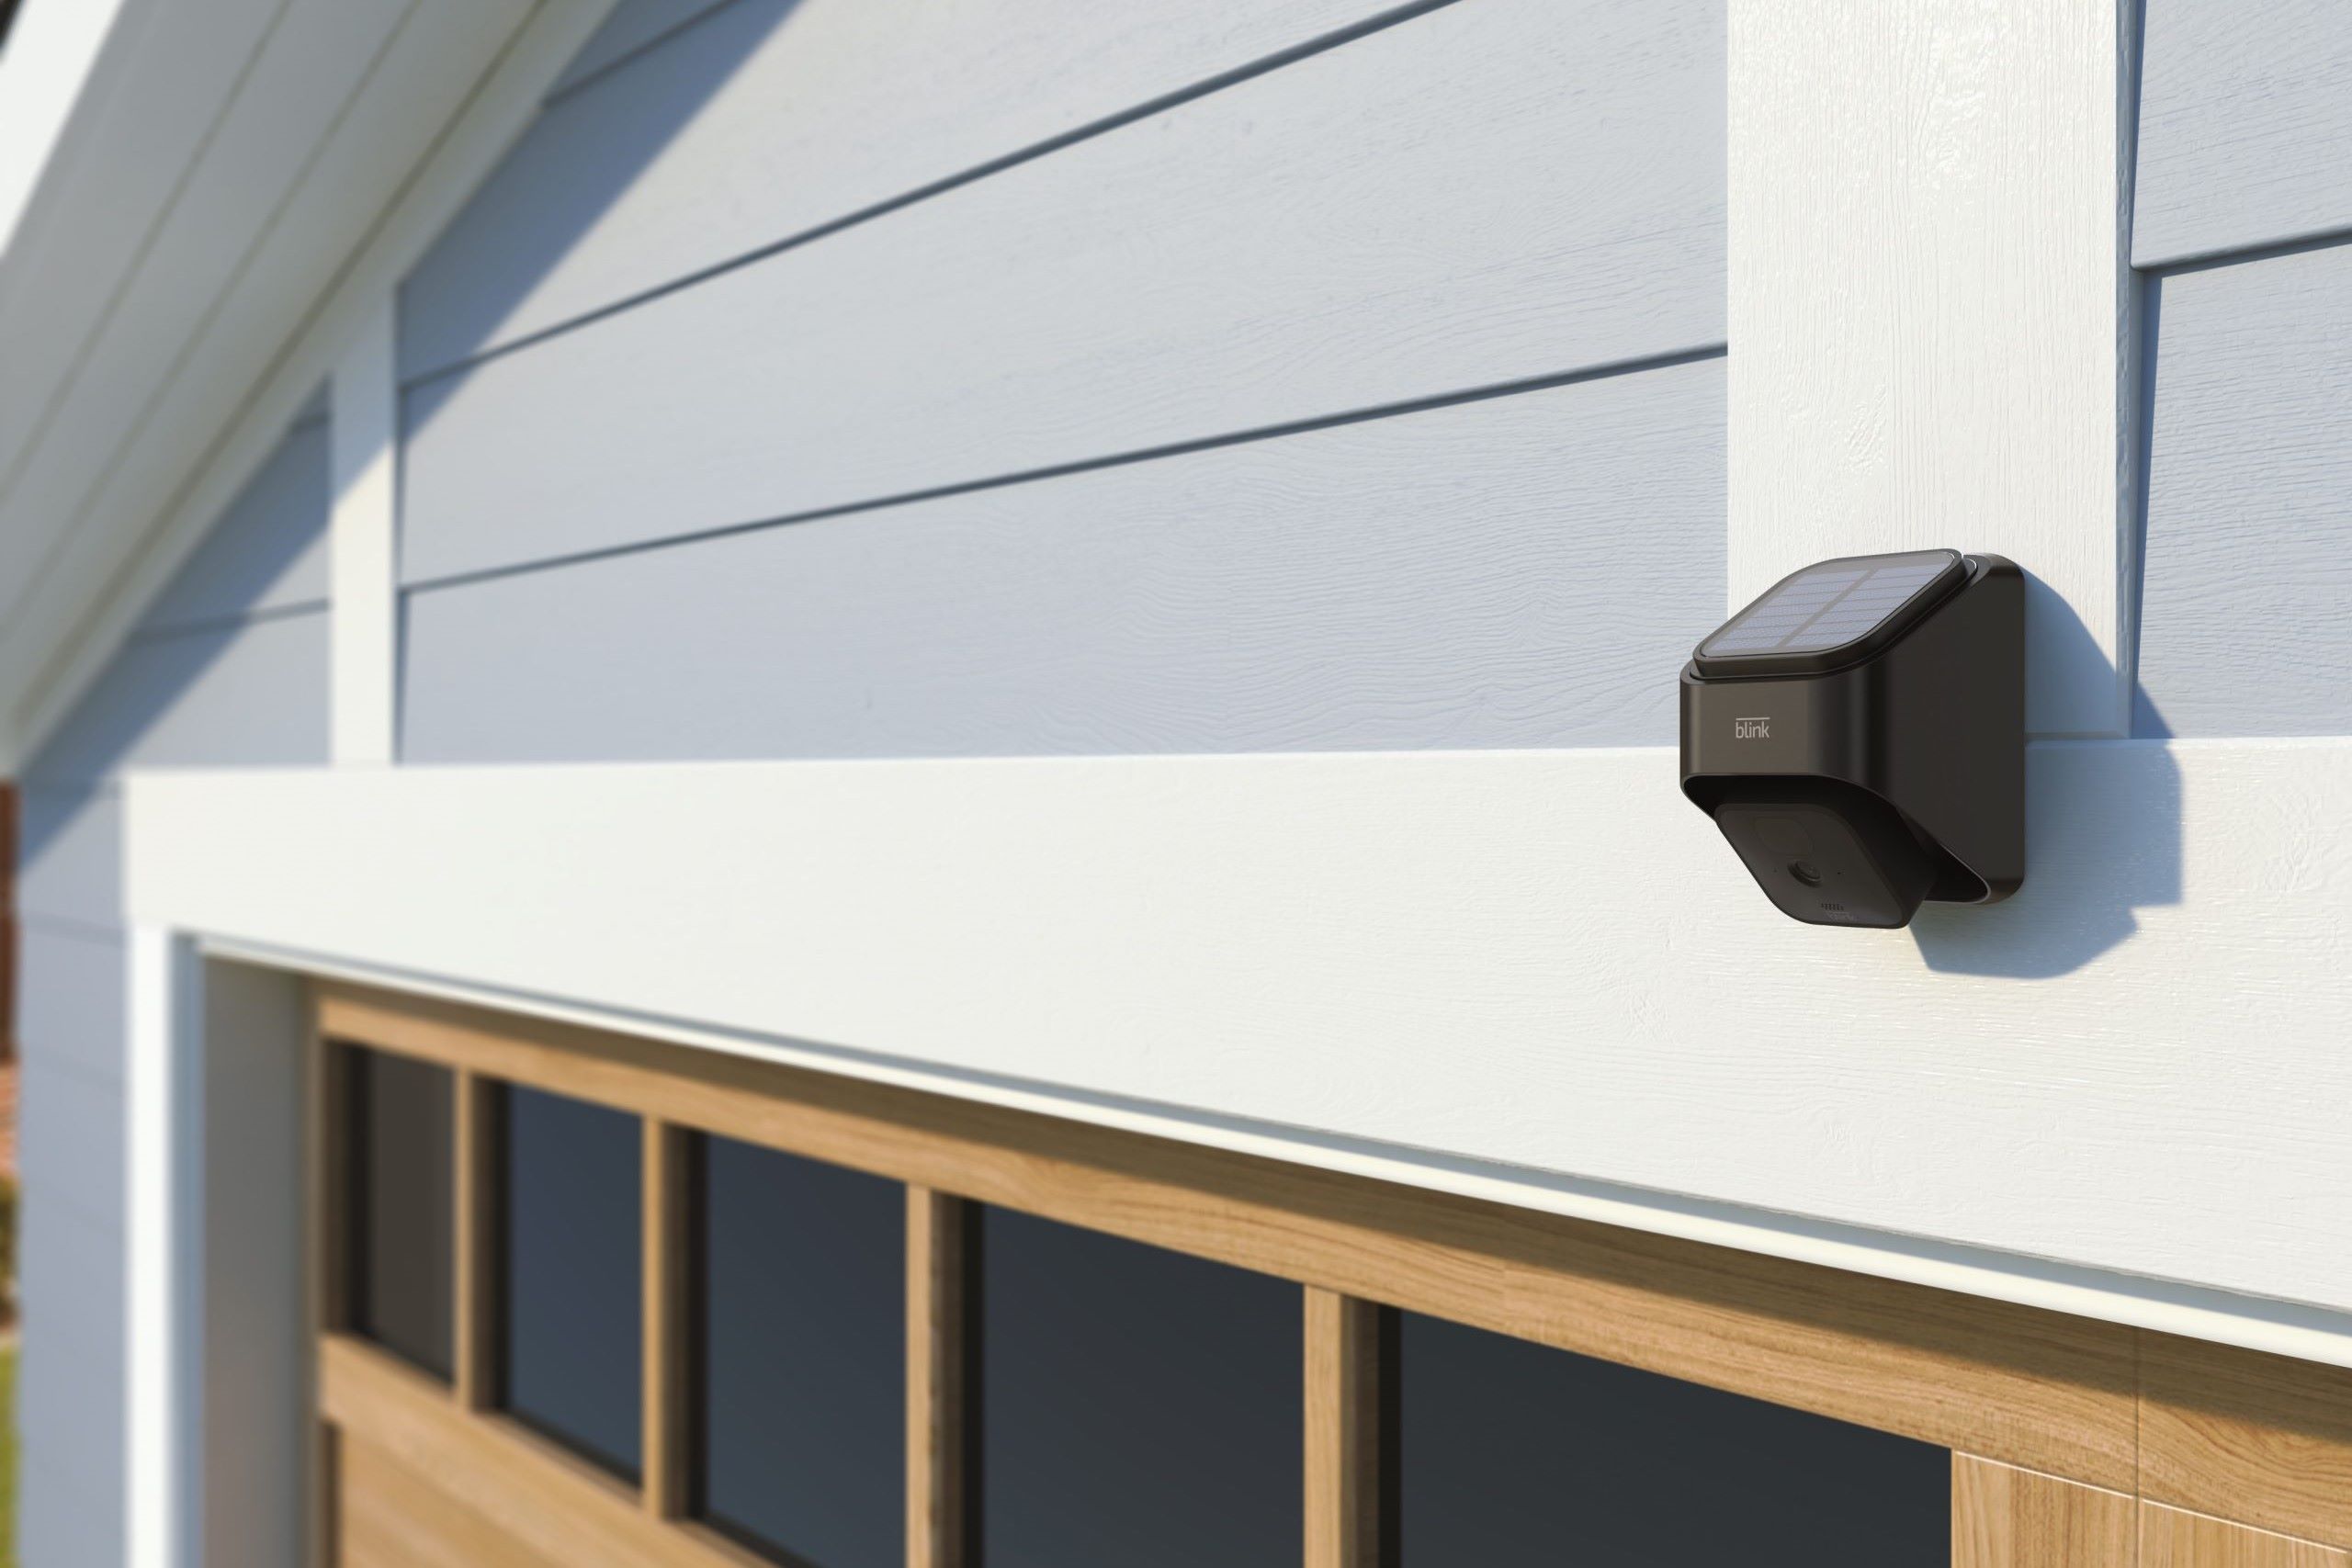 How To Install Blink Outdoor Camera On A Siding